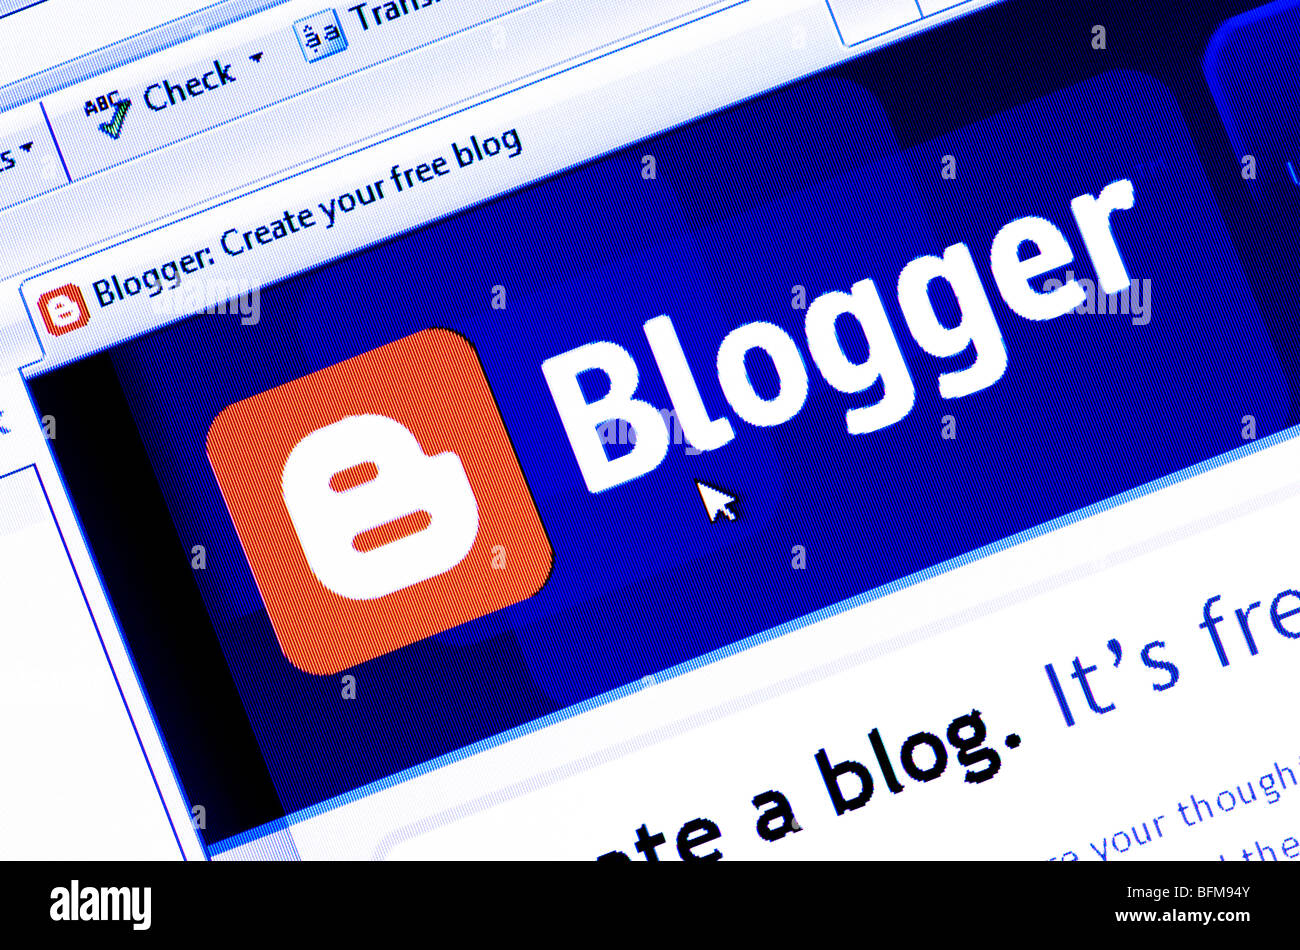 Macro screenshot of the Blogger website - the free online blog publishing system. Editorial use only. Stock Photo